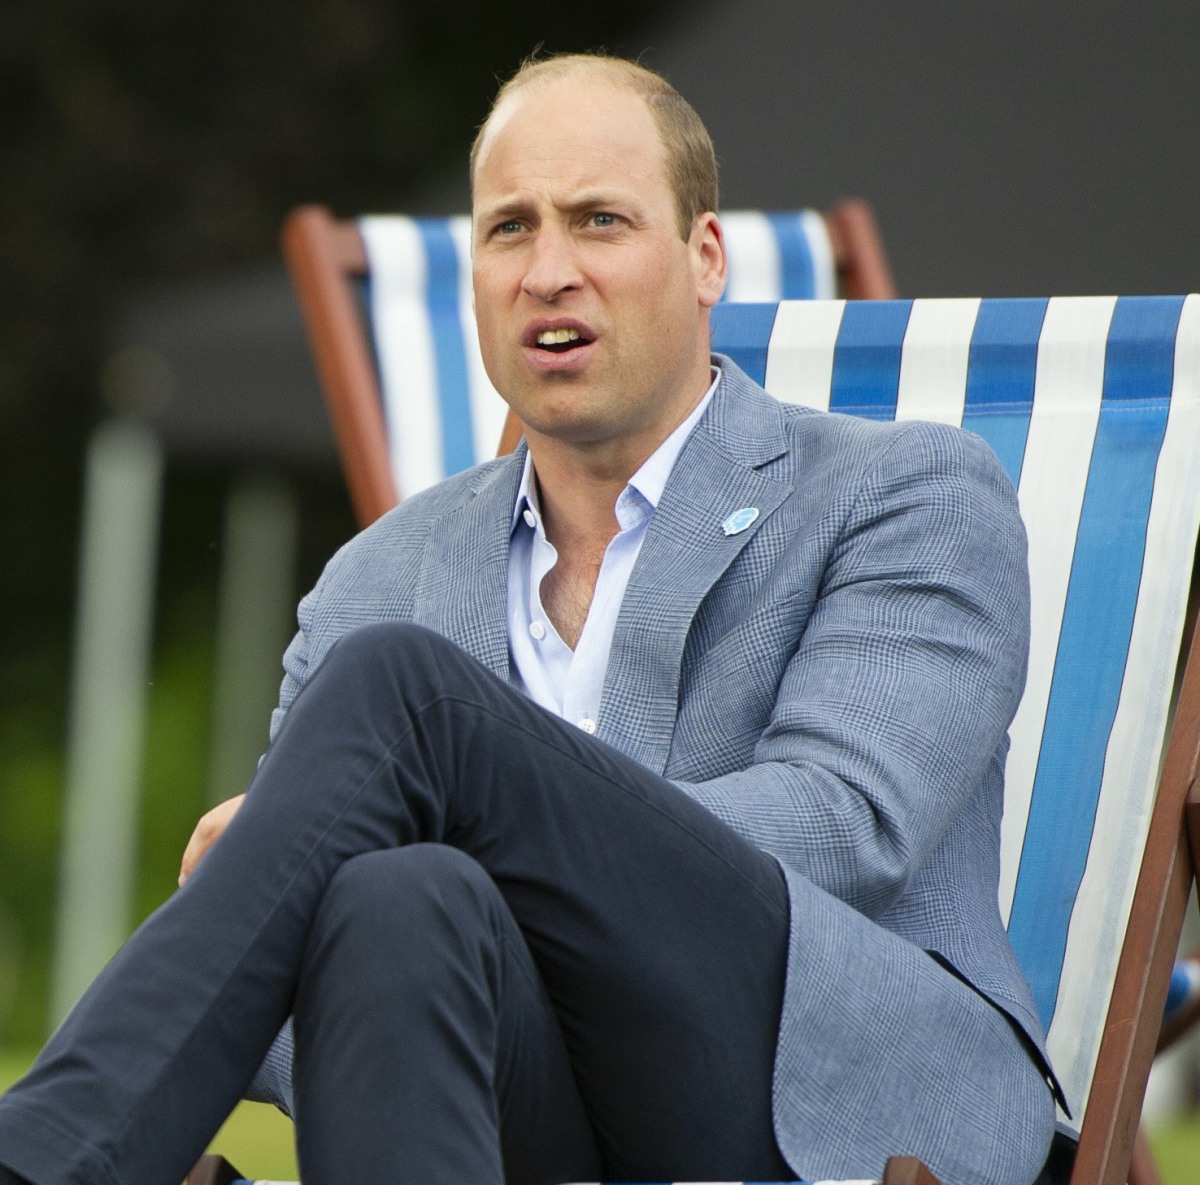 The Duke of Cambridge hosts an outdoor screening of the Heads Up FA Cup final on the Sandringham Estate. William watches with Tony Adams as Chelsea score.   1.8.2020